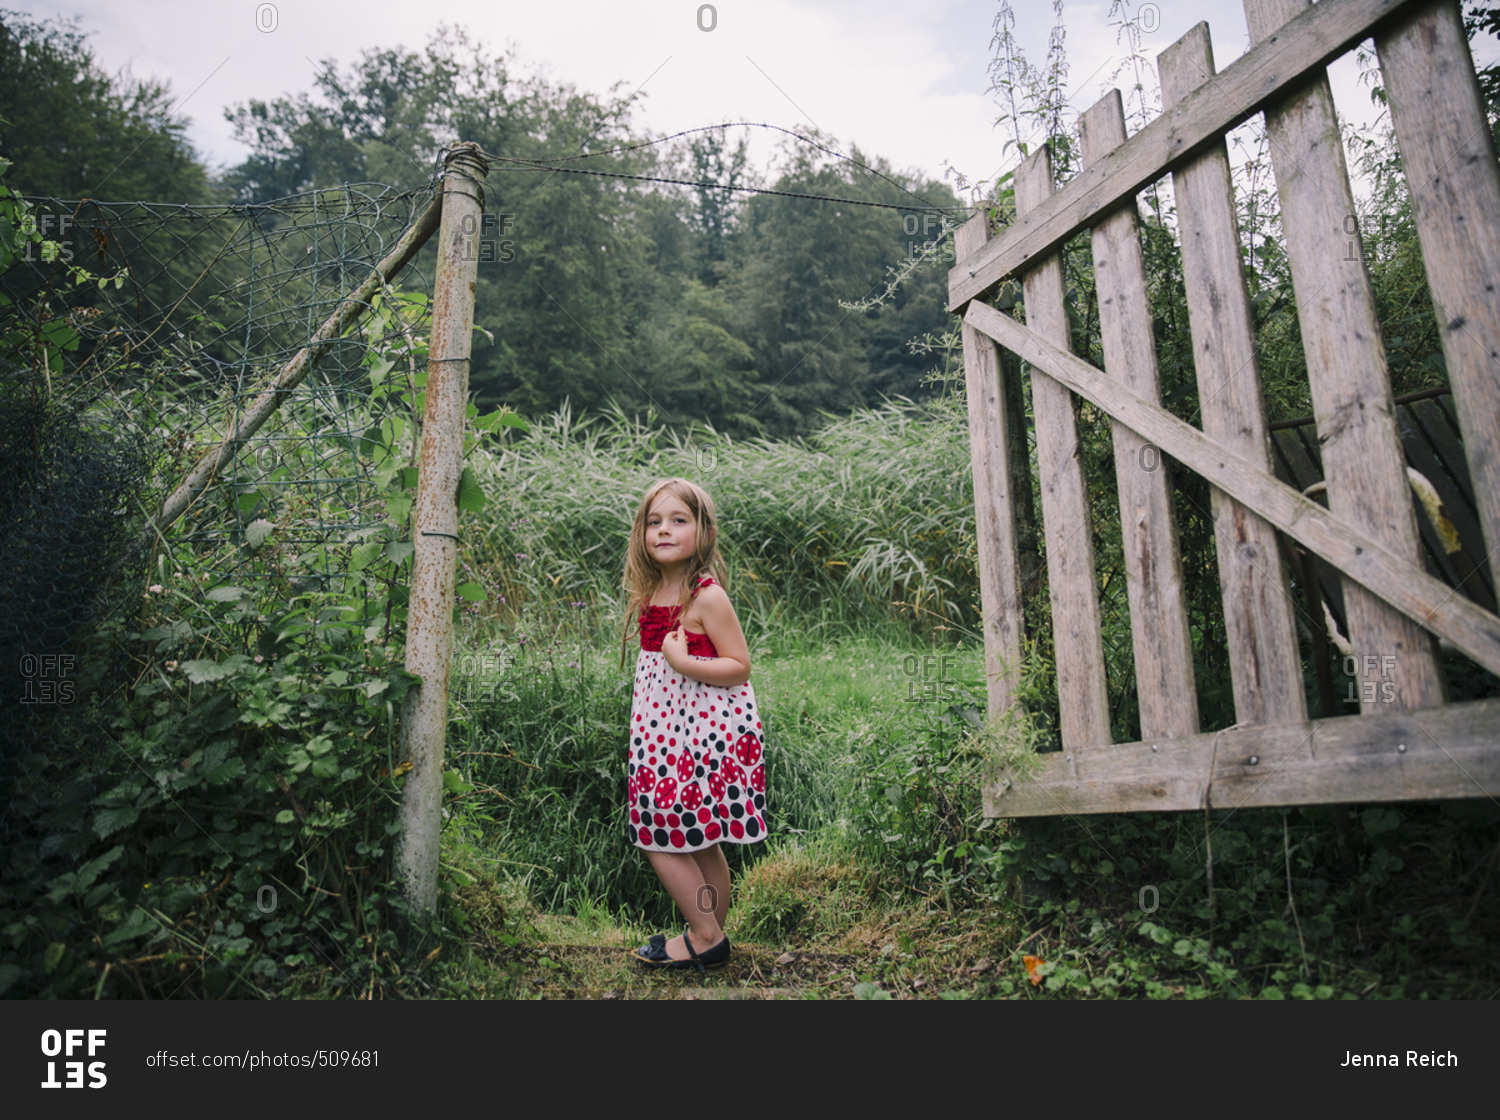 Girl at rural fence in dress